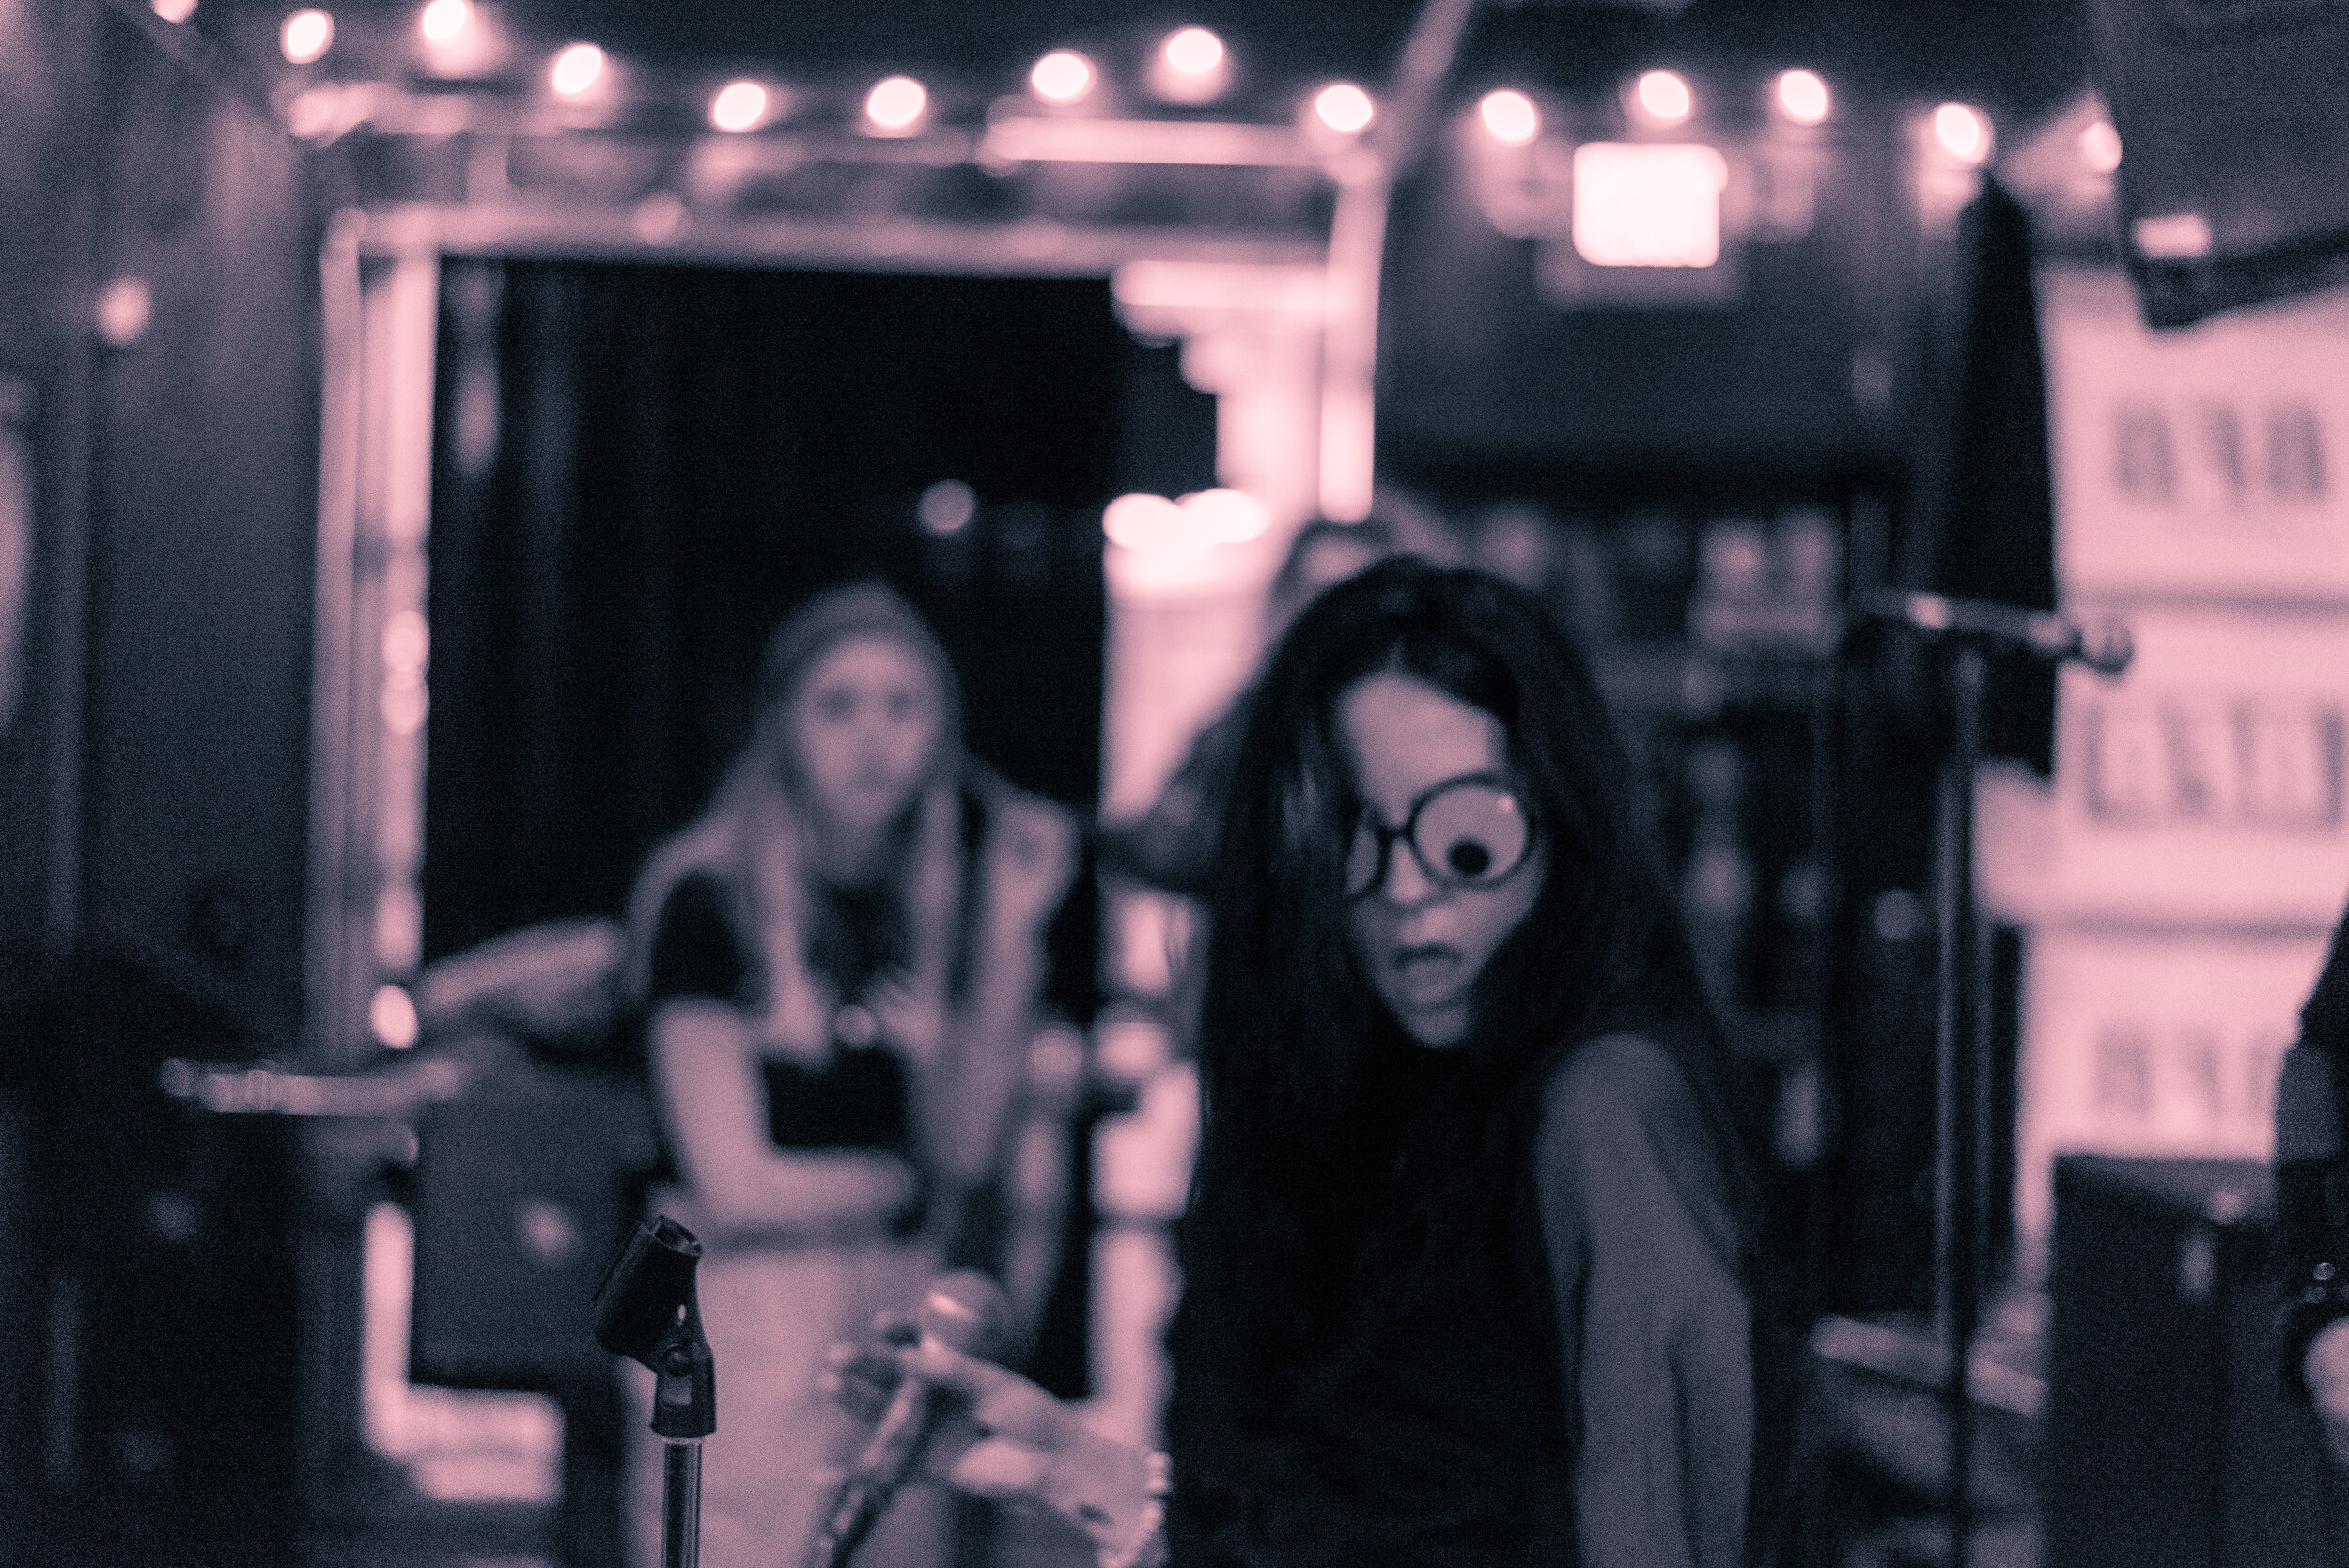  The Weird Sisters at BFB. Jan 24, 2020. Photo by Zane Brammell. 